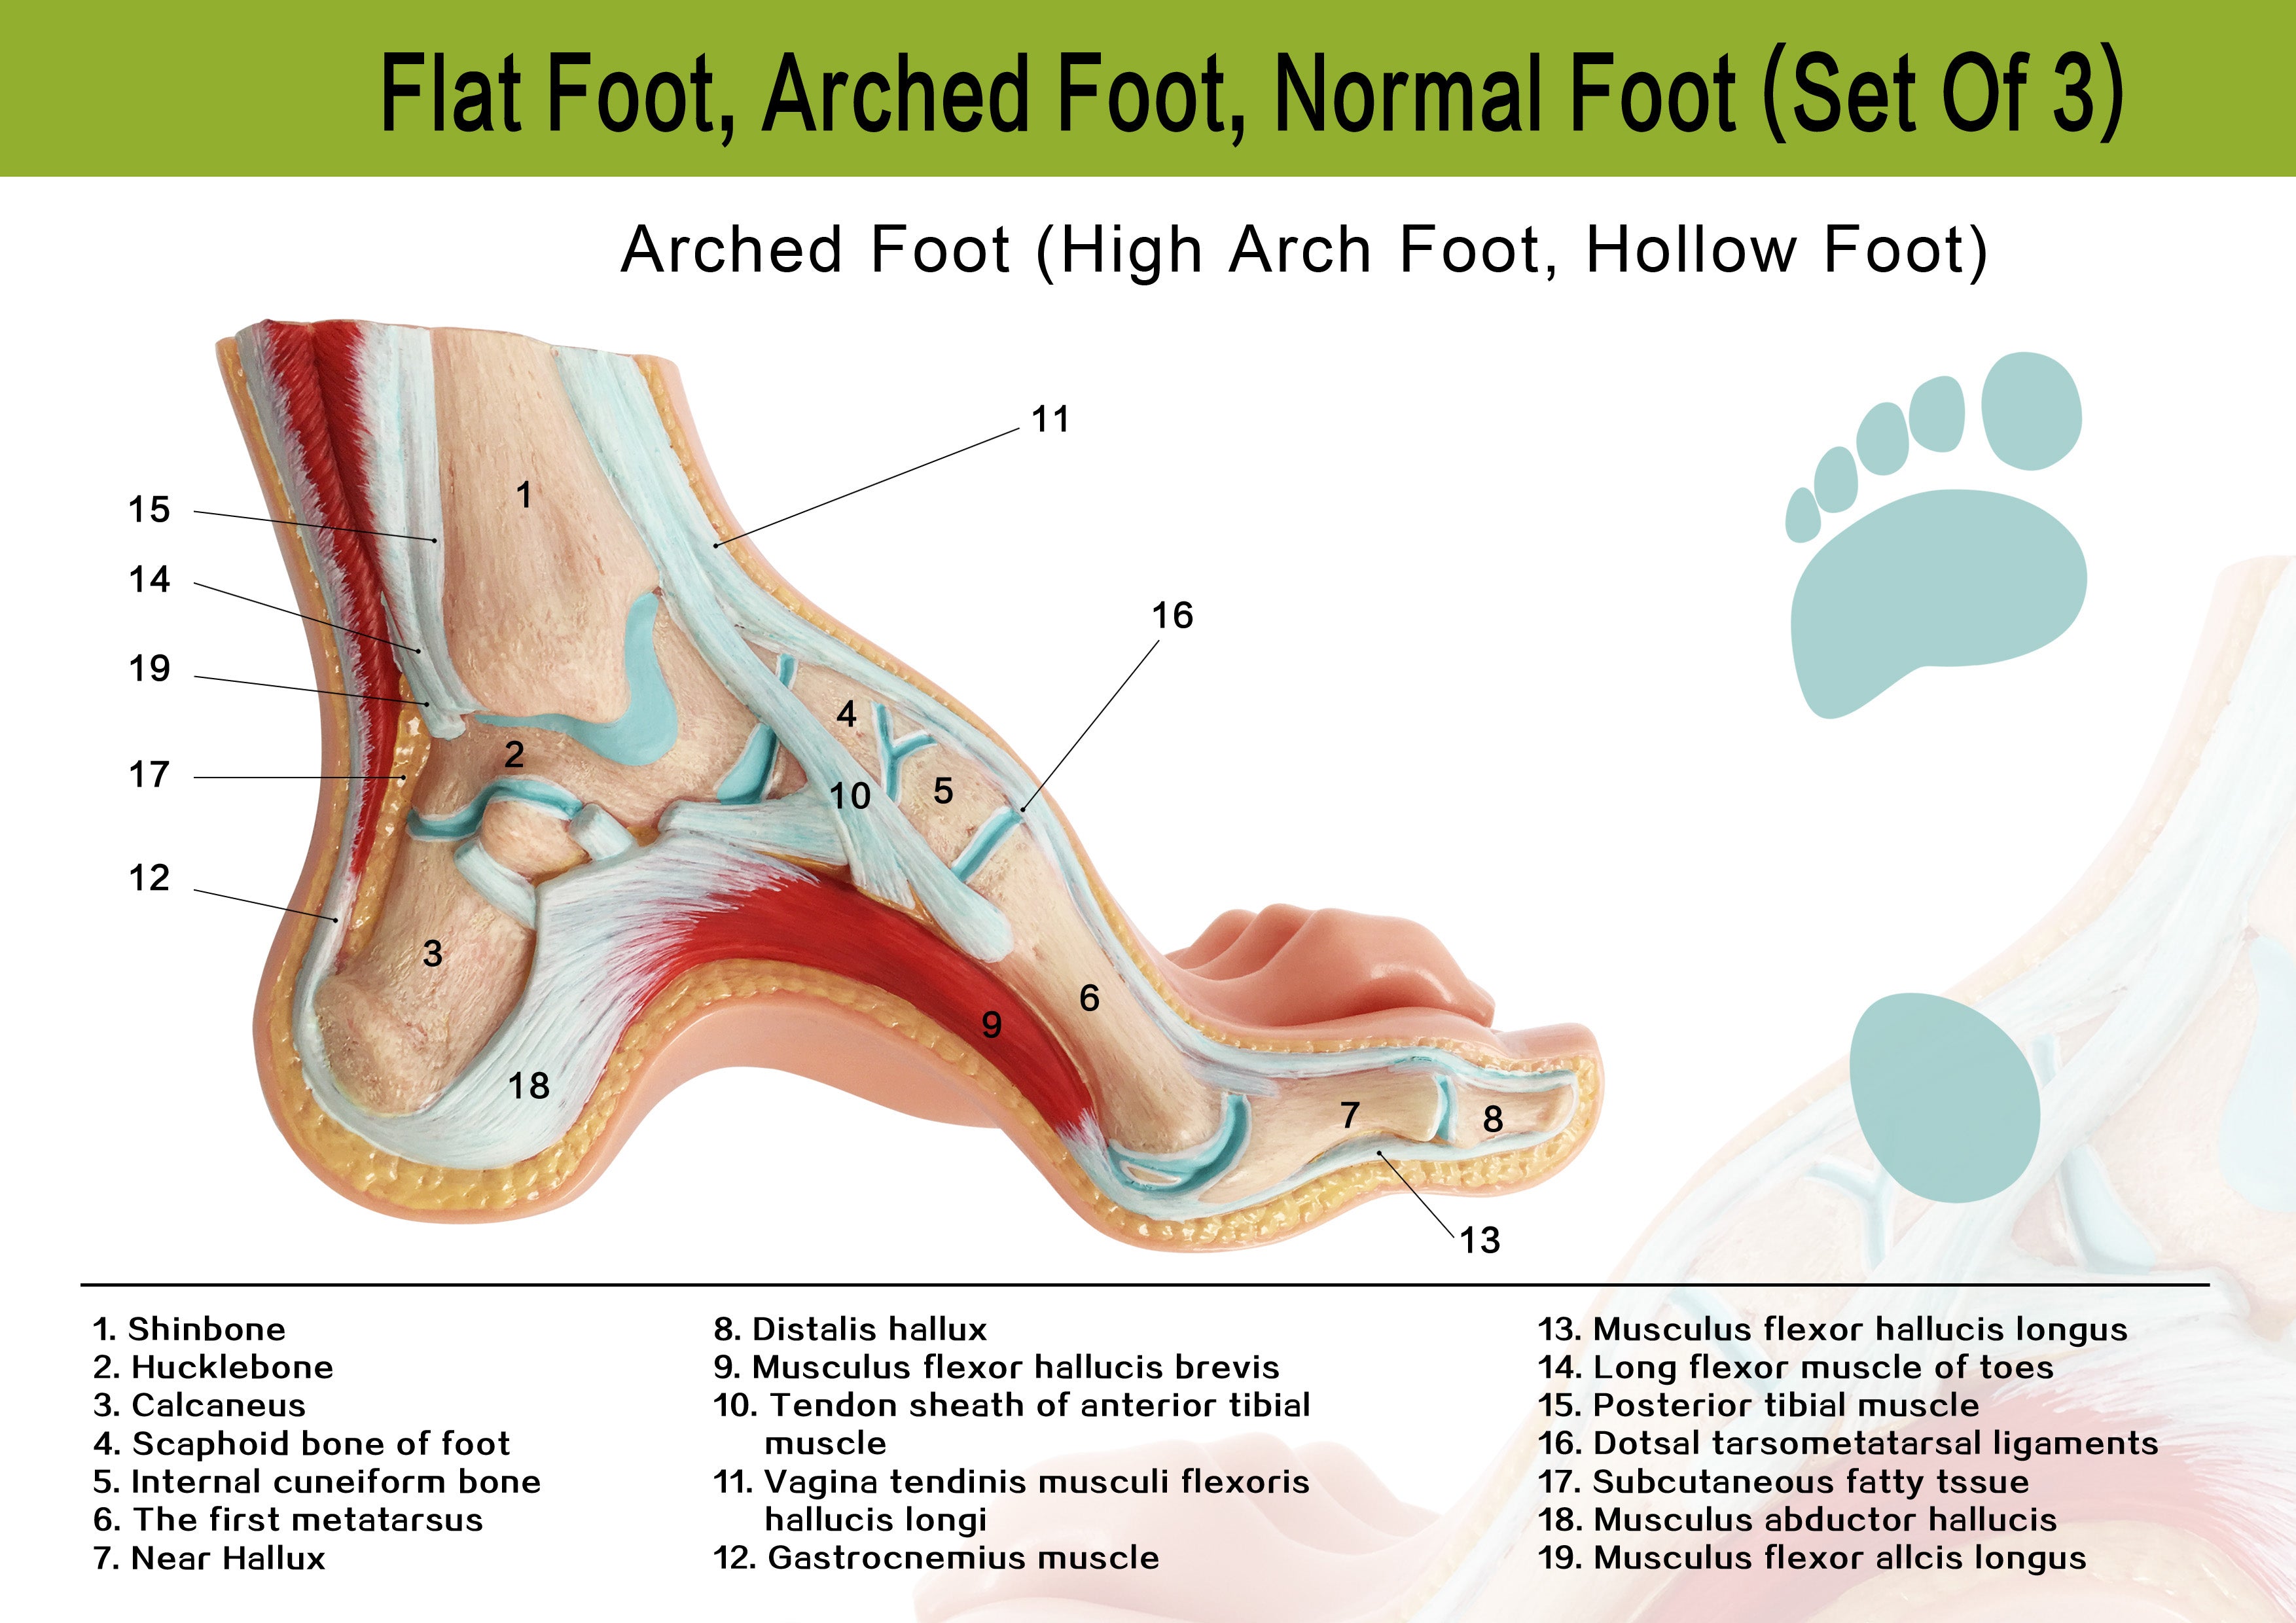 Evotech Scientific Podiatry Anatomy Models, Set of 3 Human Feet Flat Foot, Normal Foot and a High Arch